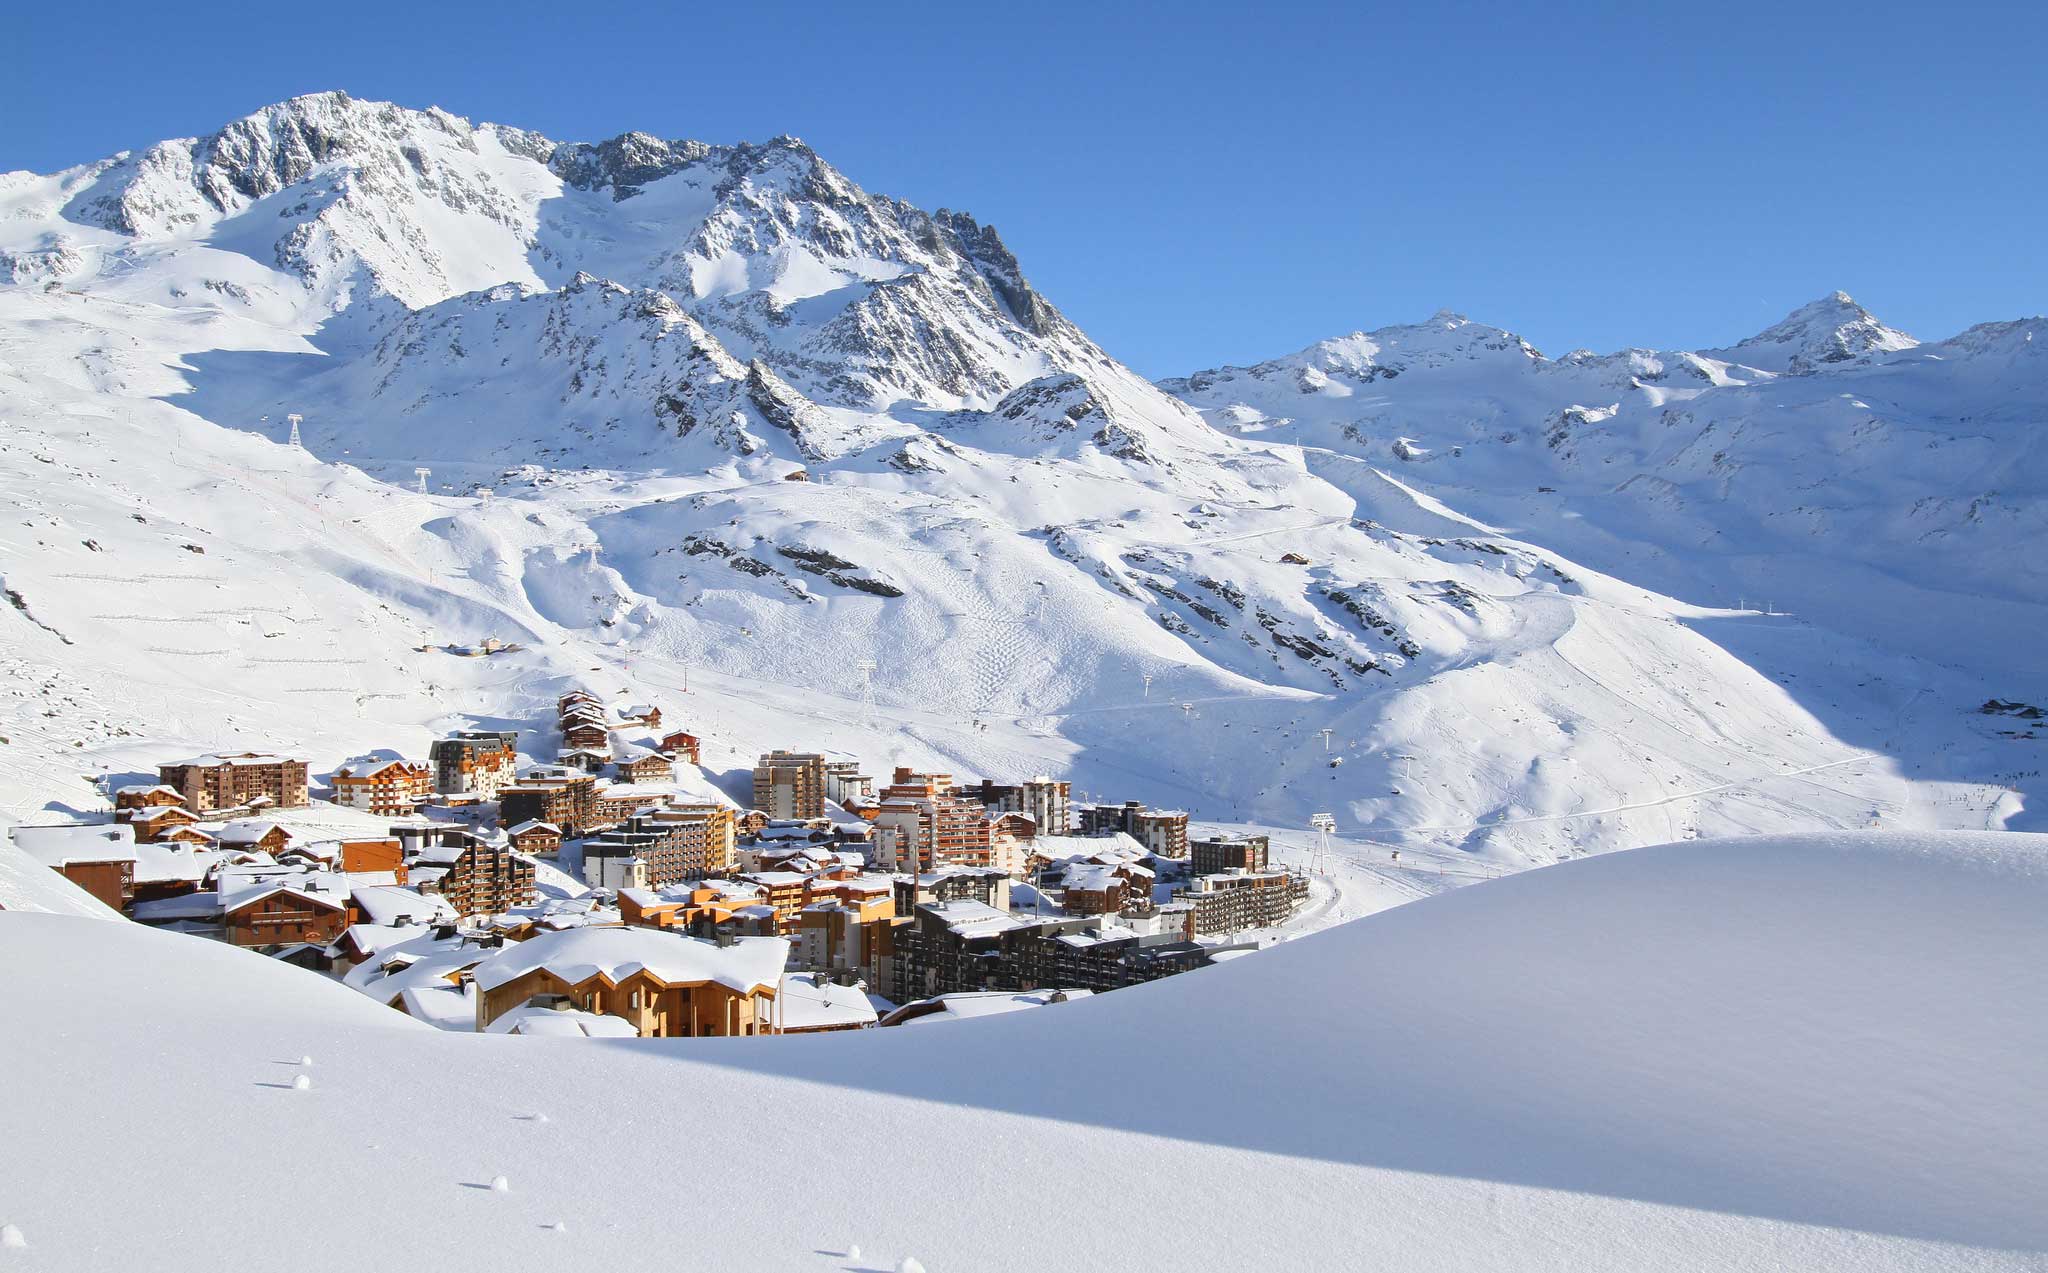 000s Of Ski Holiday Deals For Winter 2020 2021